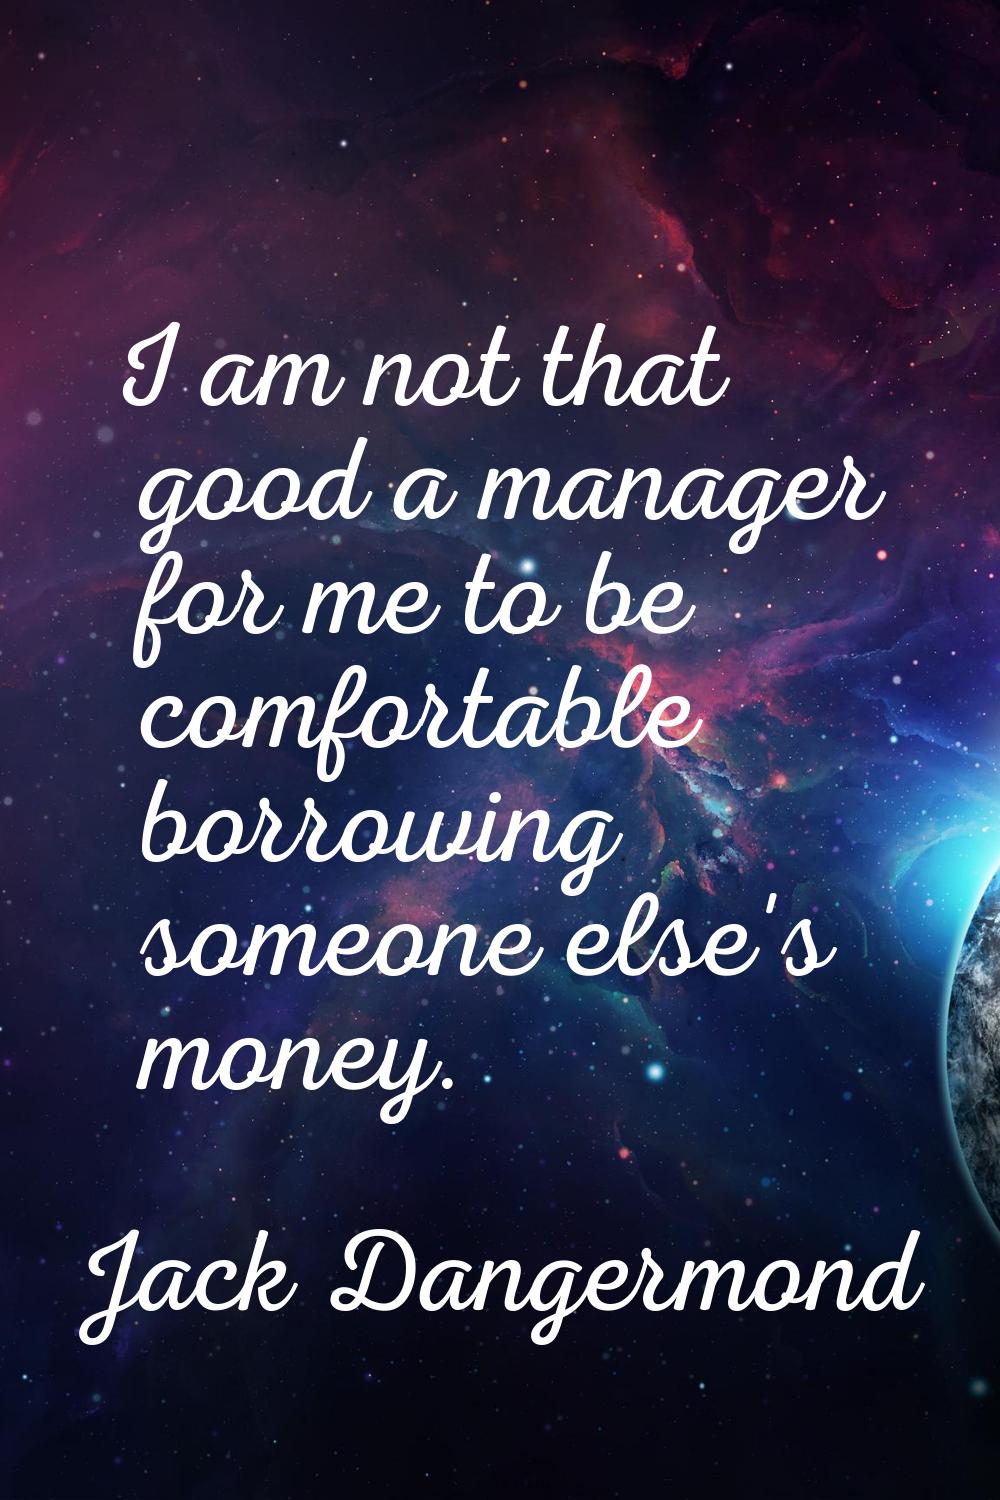 I am not that good a manager for me to be comfortable borrowing someone else's money.